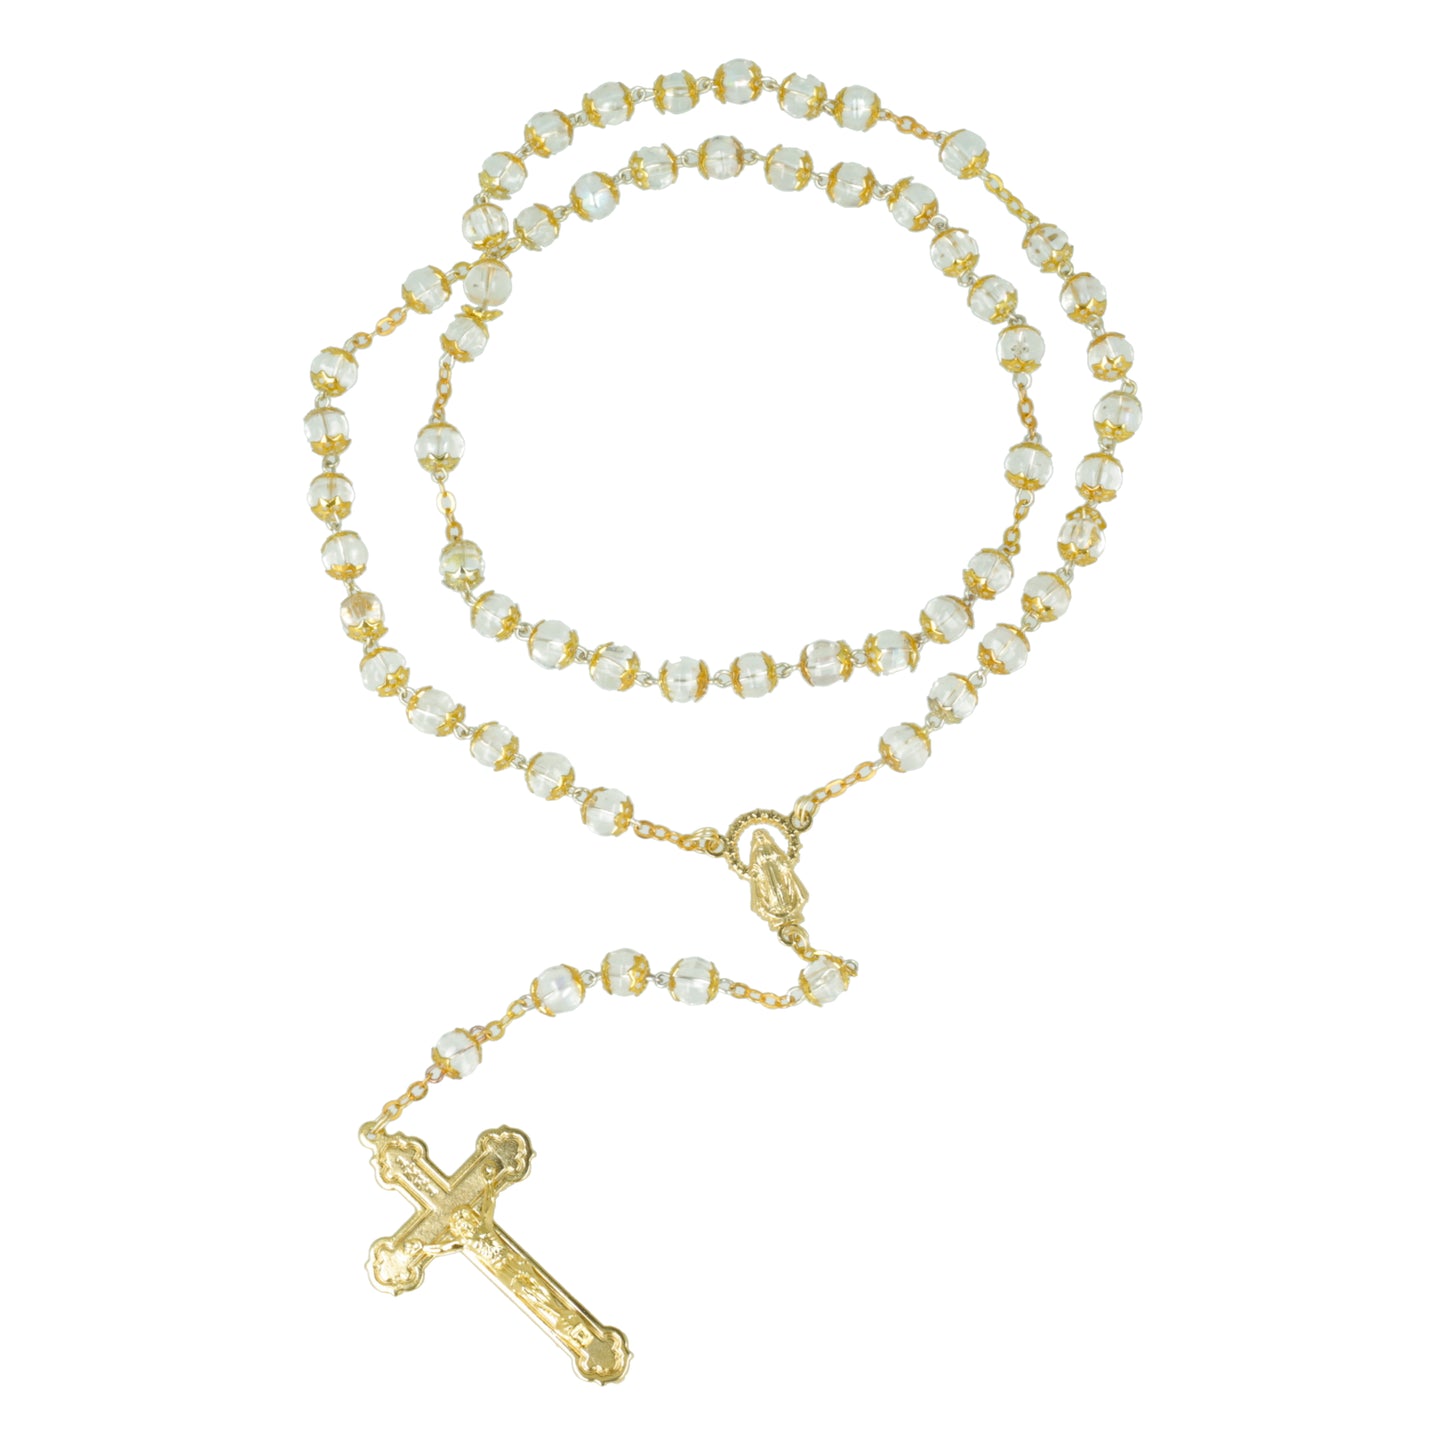 Golden Crystal Rosary With Calotas Souvenirs from Italy